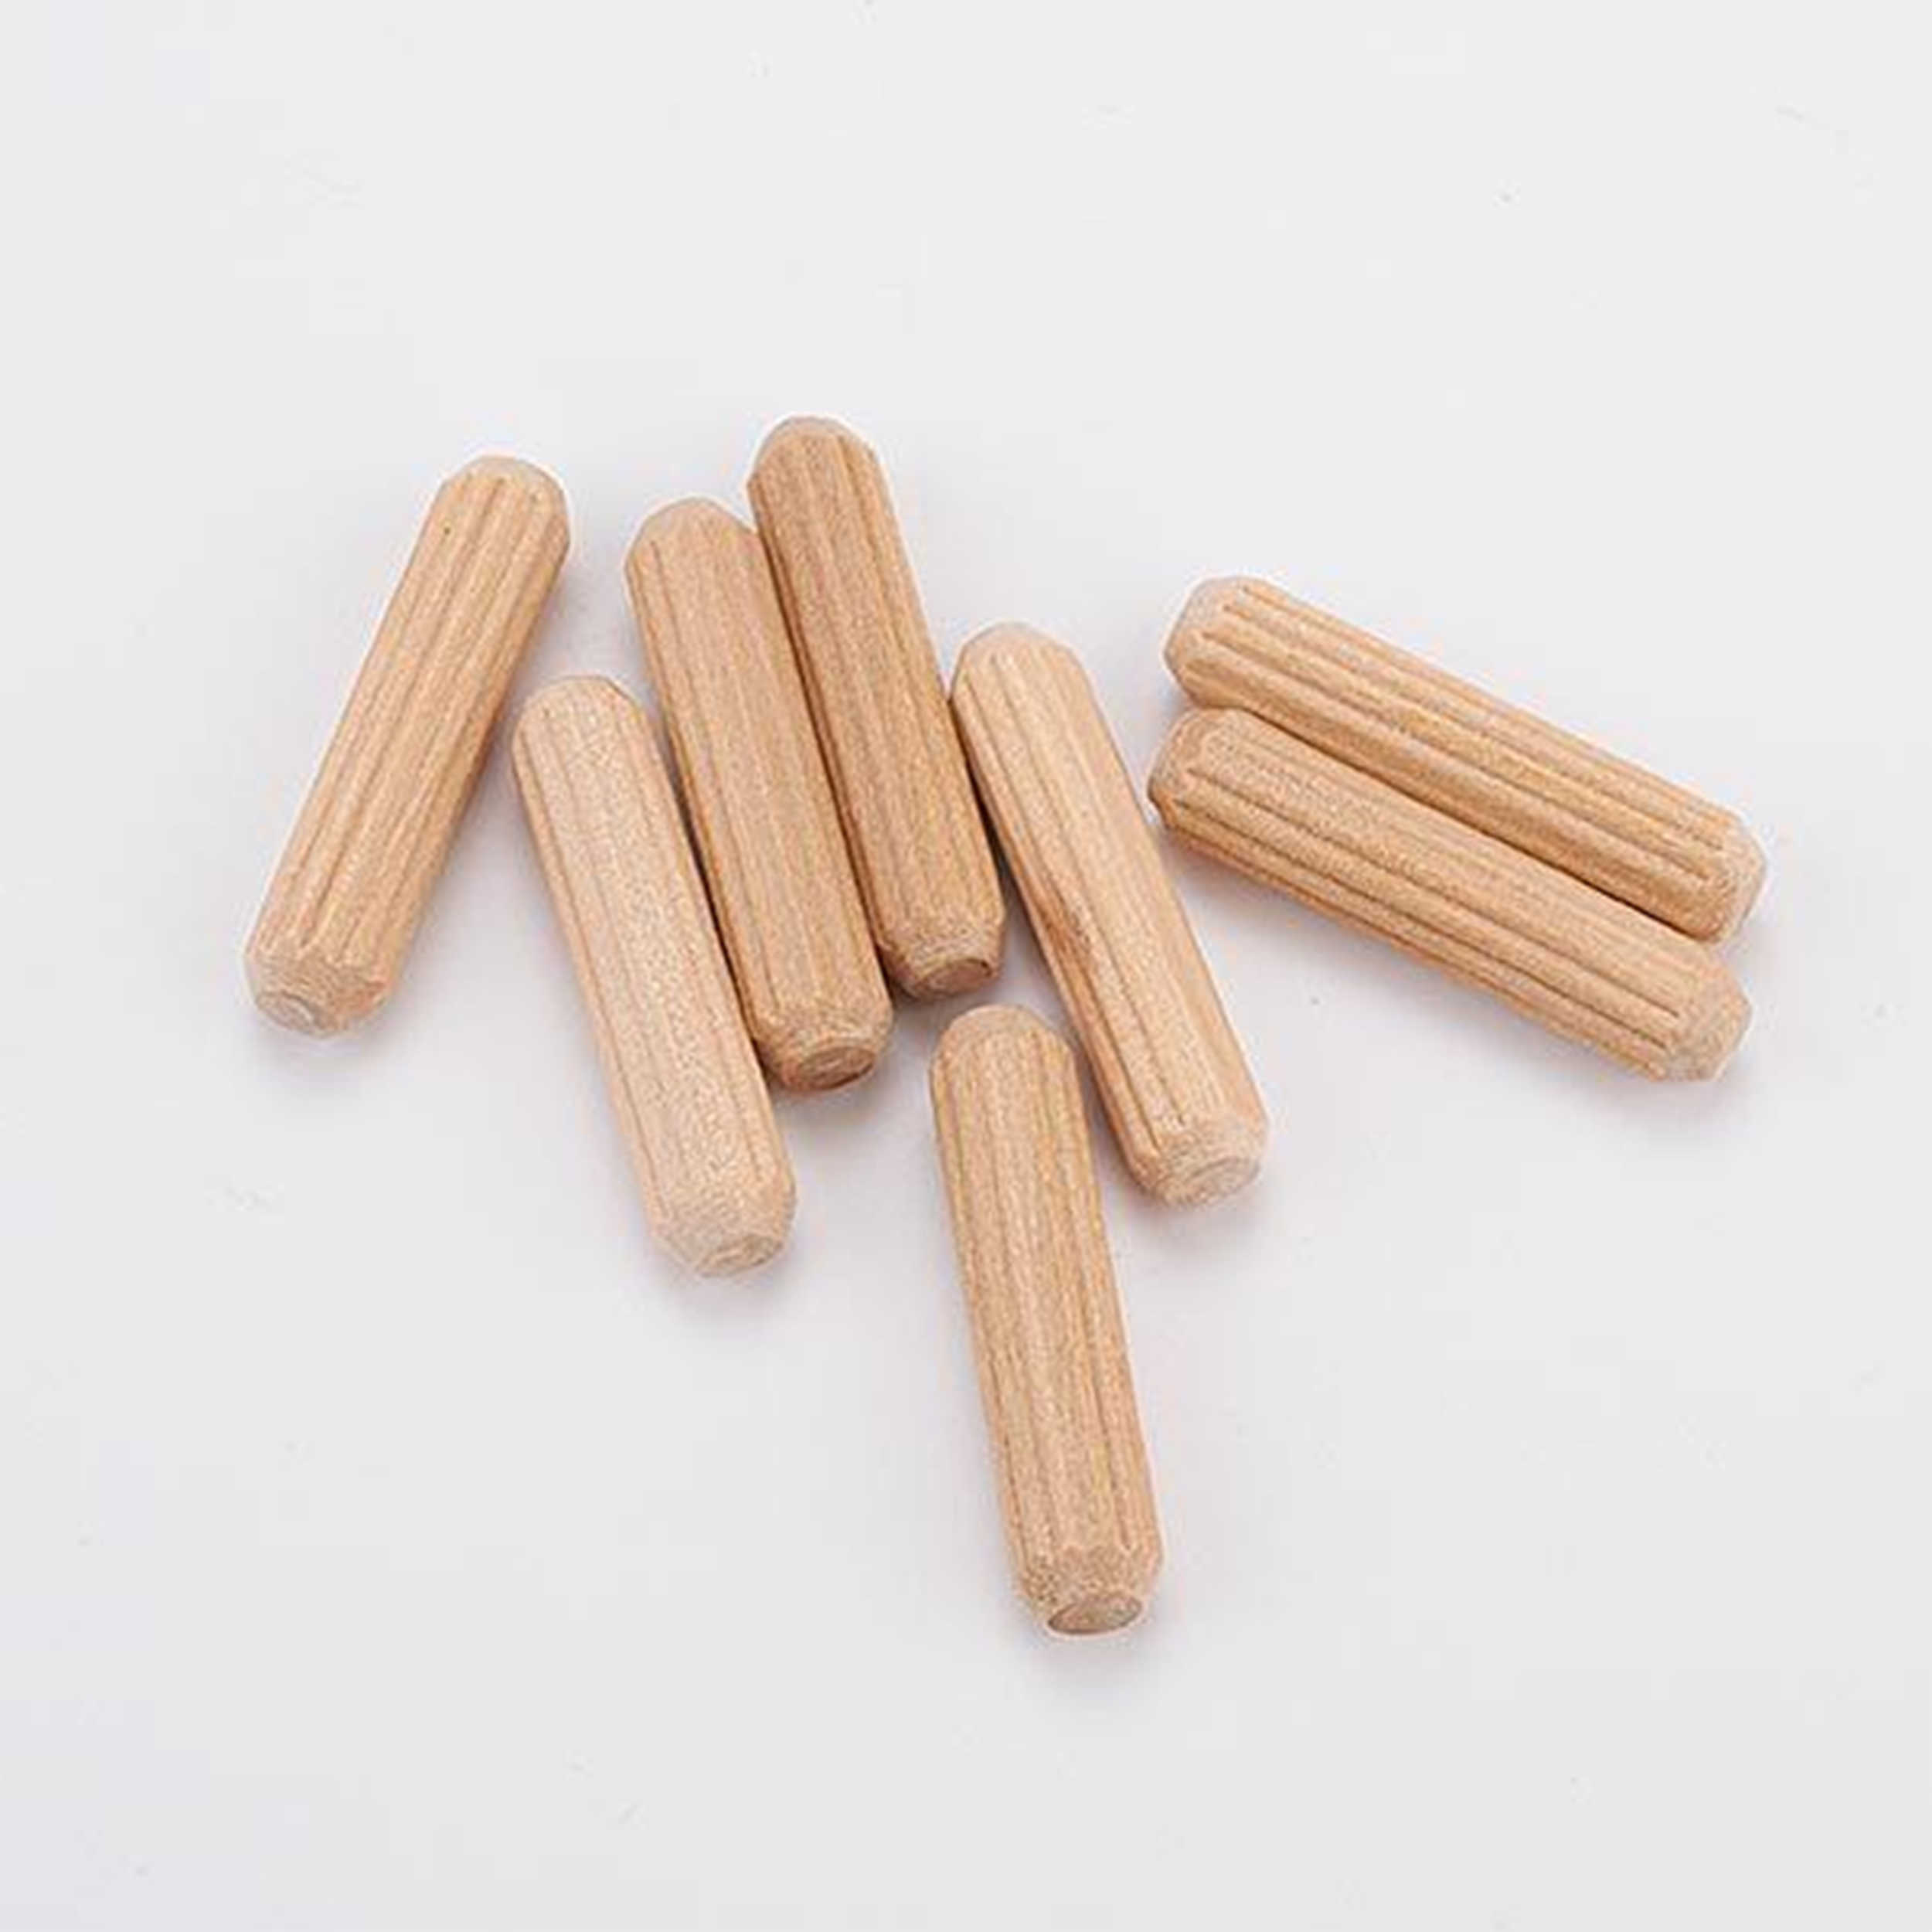 MILESCRAFT 50-Count 1/4-Inch Fluted Dowel Pins